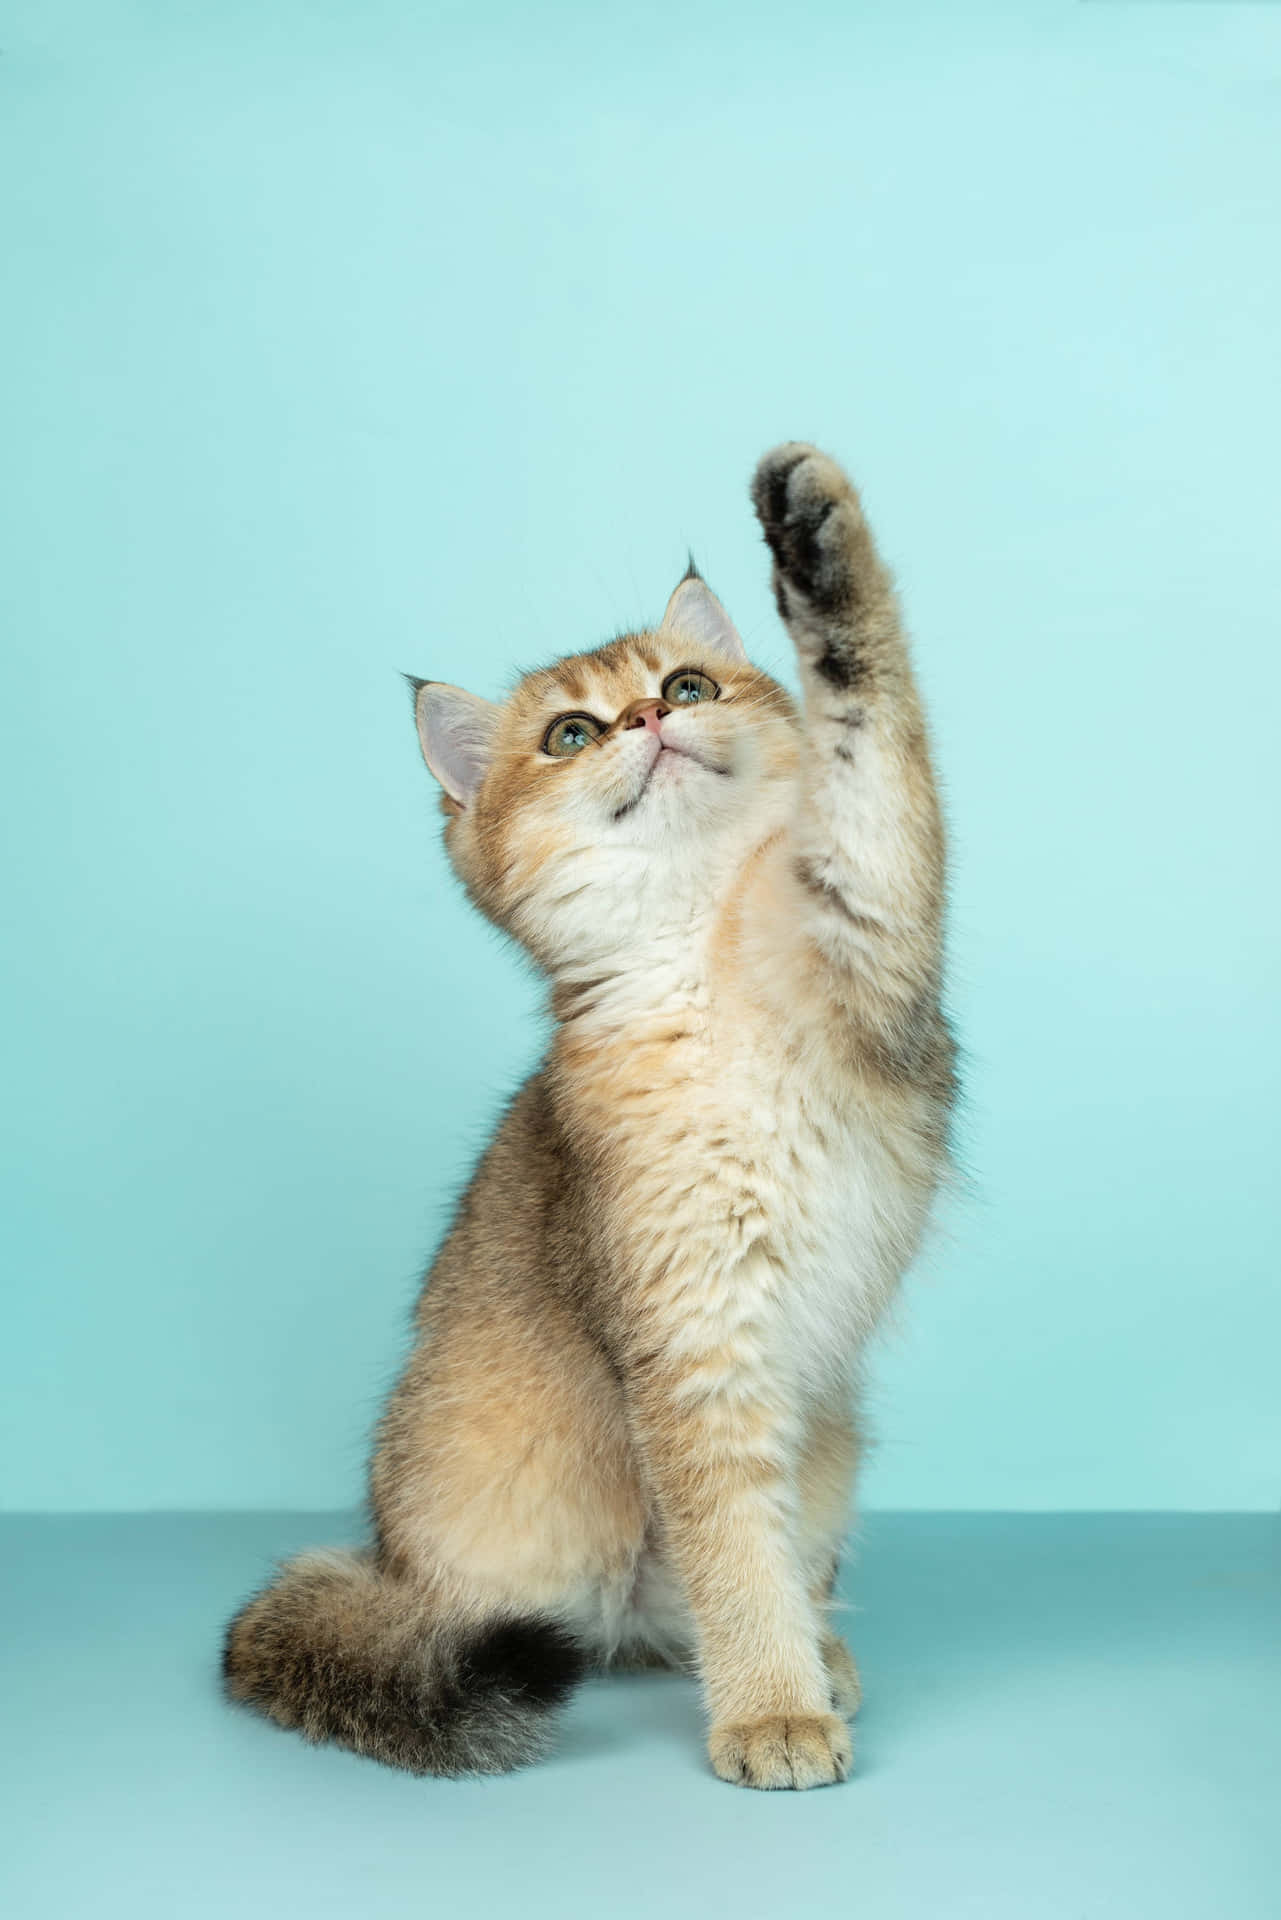 "Playful Paws Up - Adorable Kitten Display Picture" Wallpaper